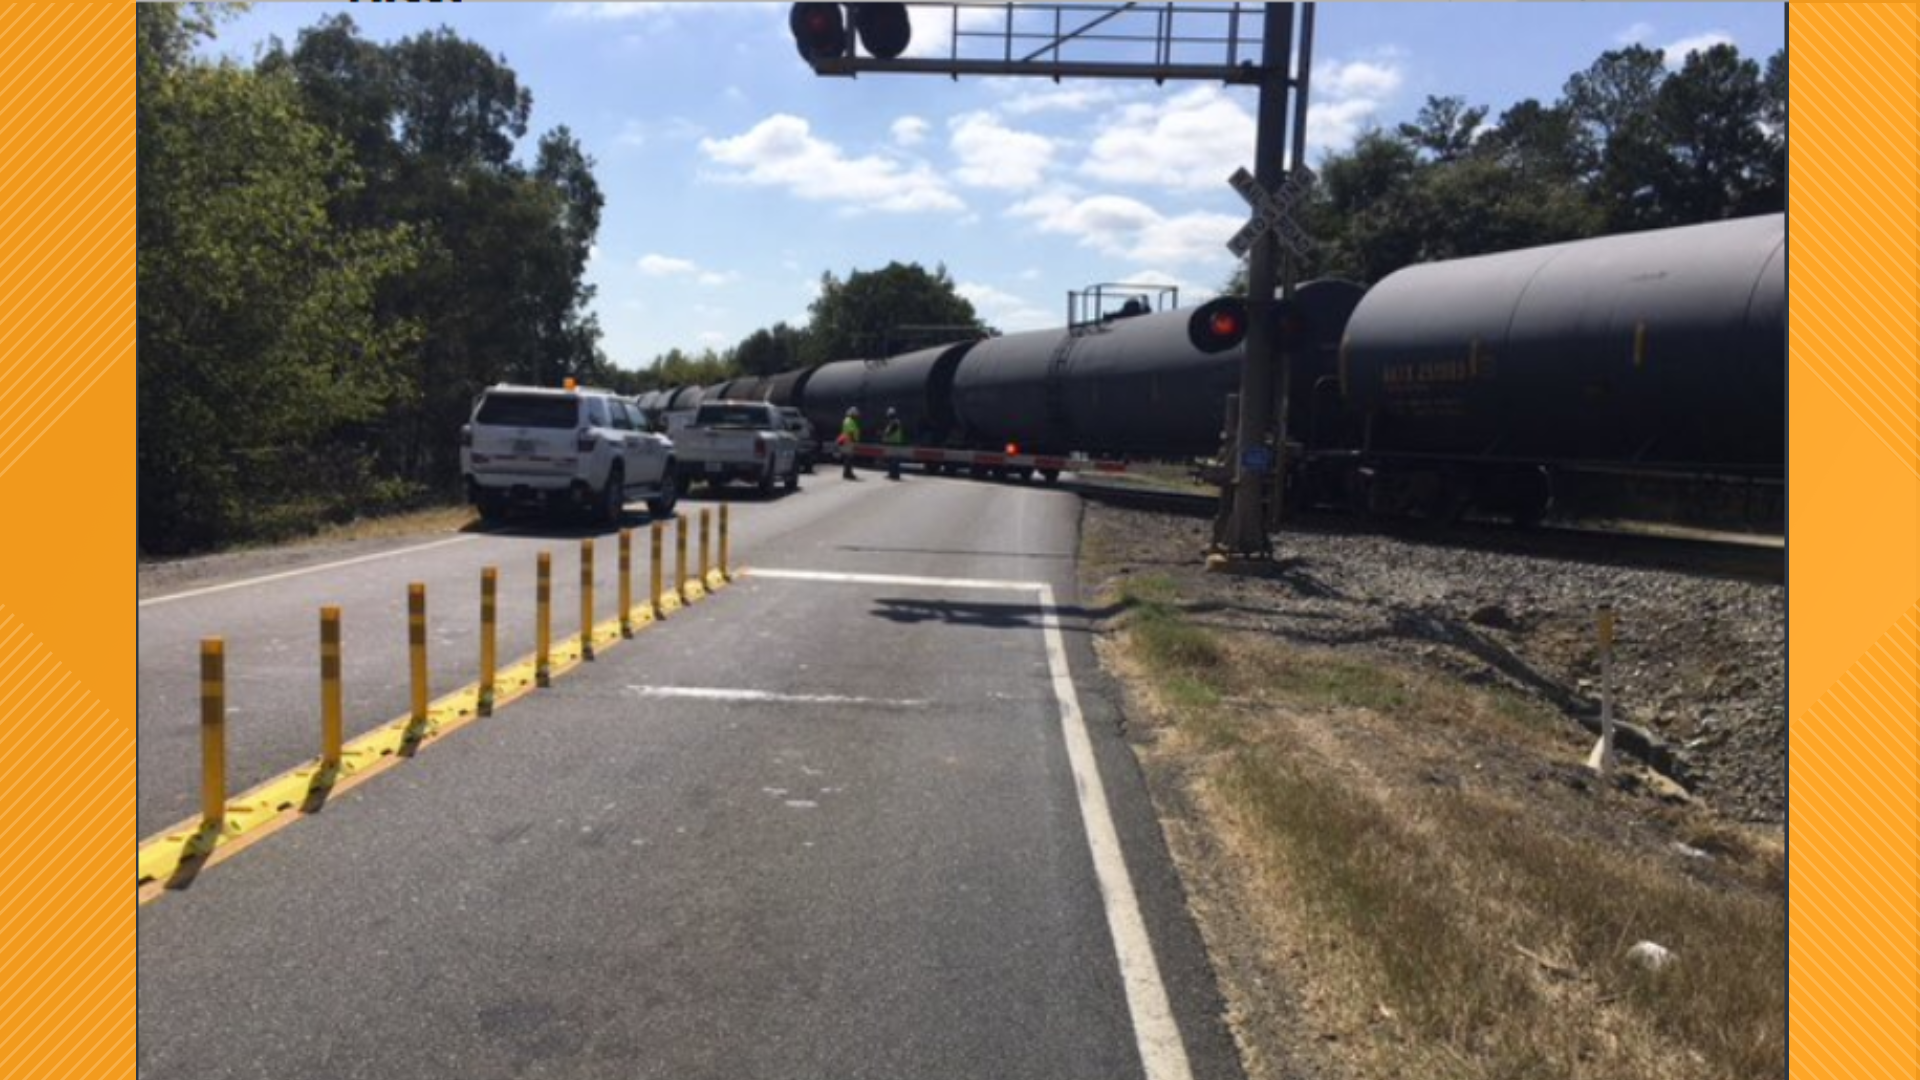 Around 30 train cars are derailed and several major roads are completely blocked